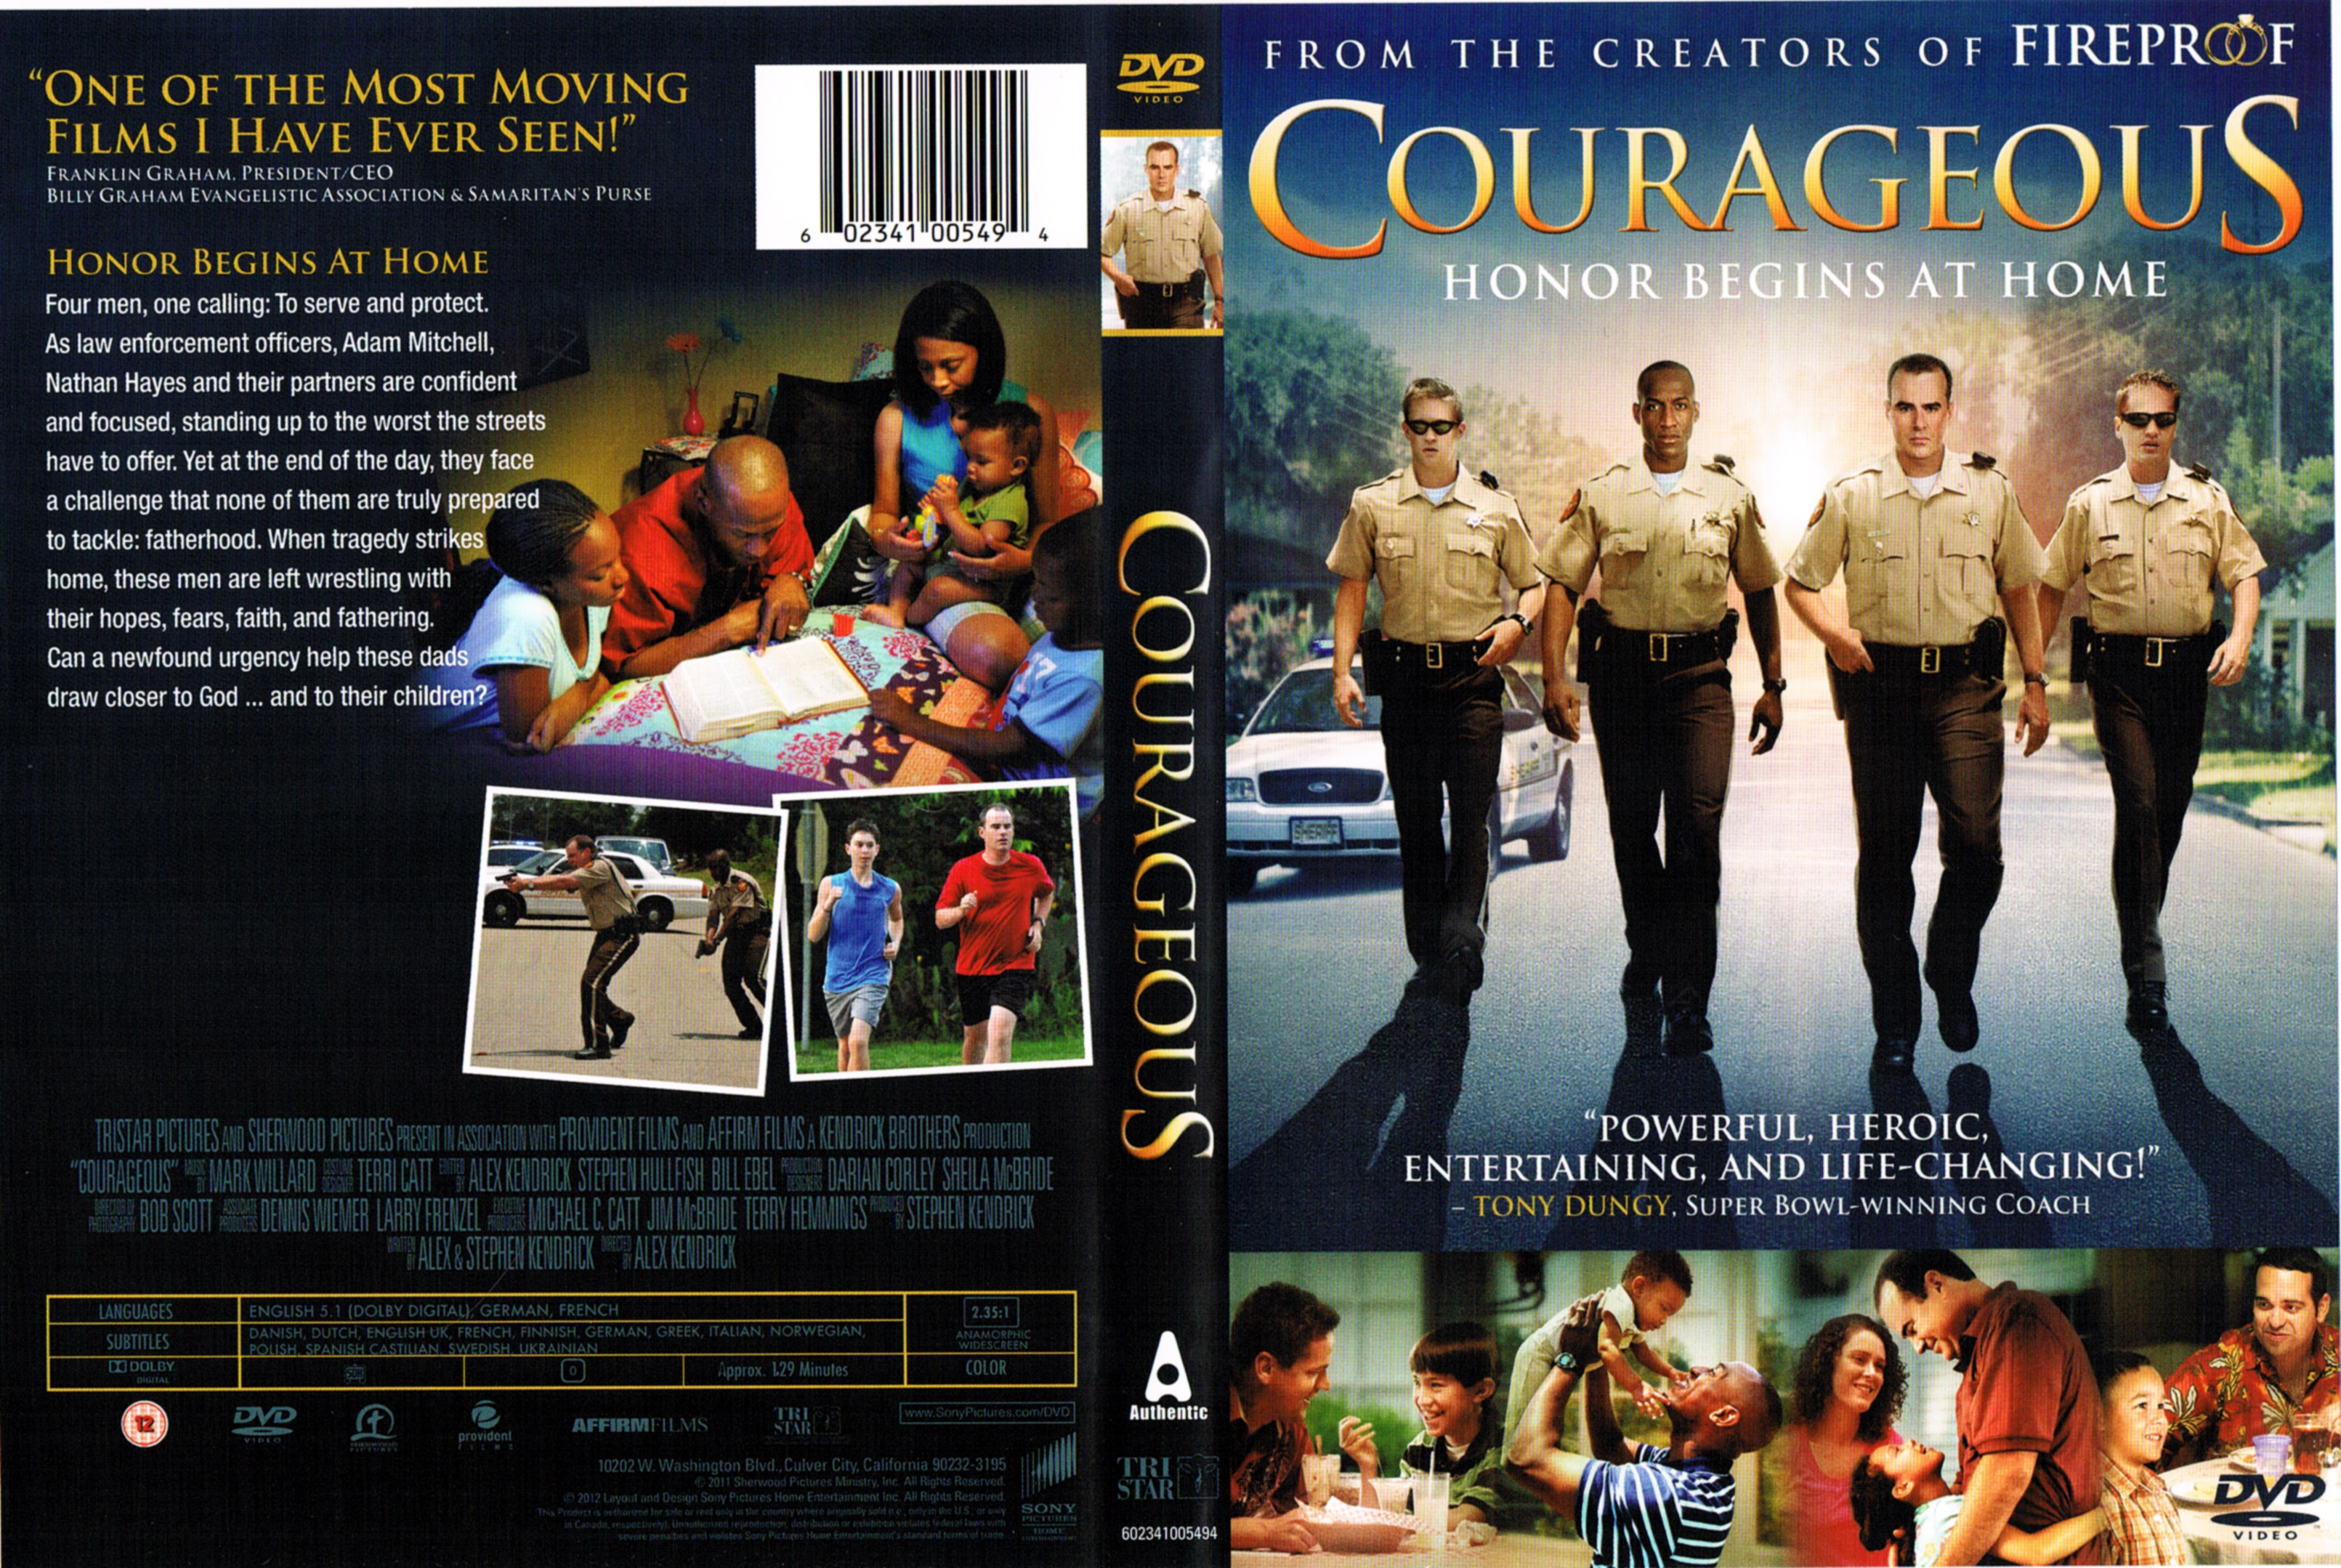 Jaquette DVD Courageous Zone 1